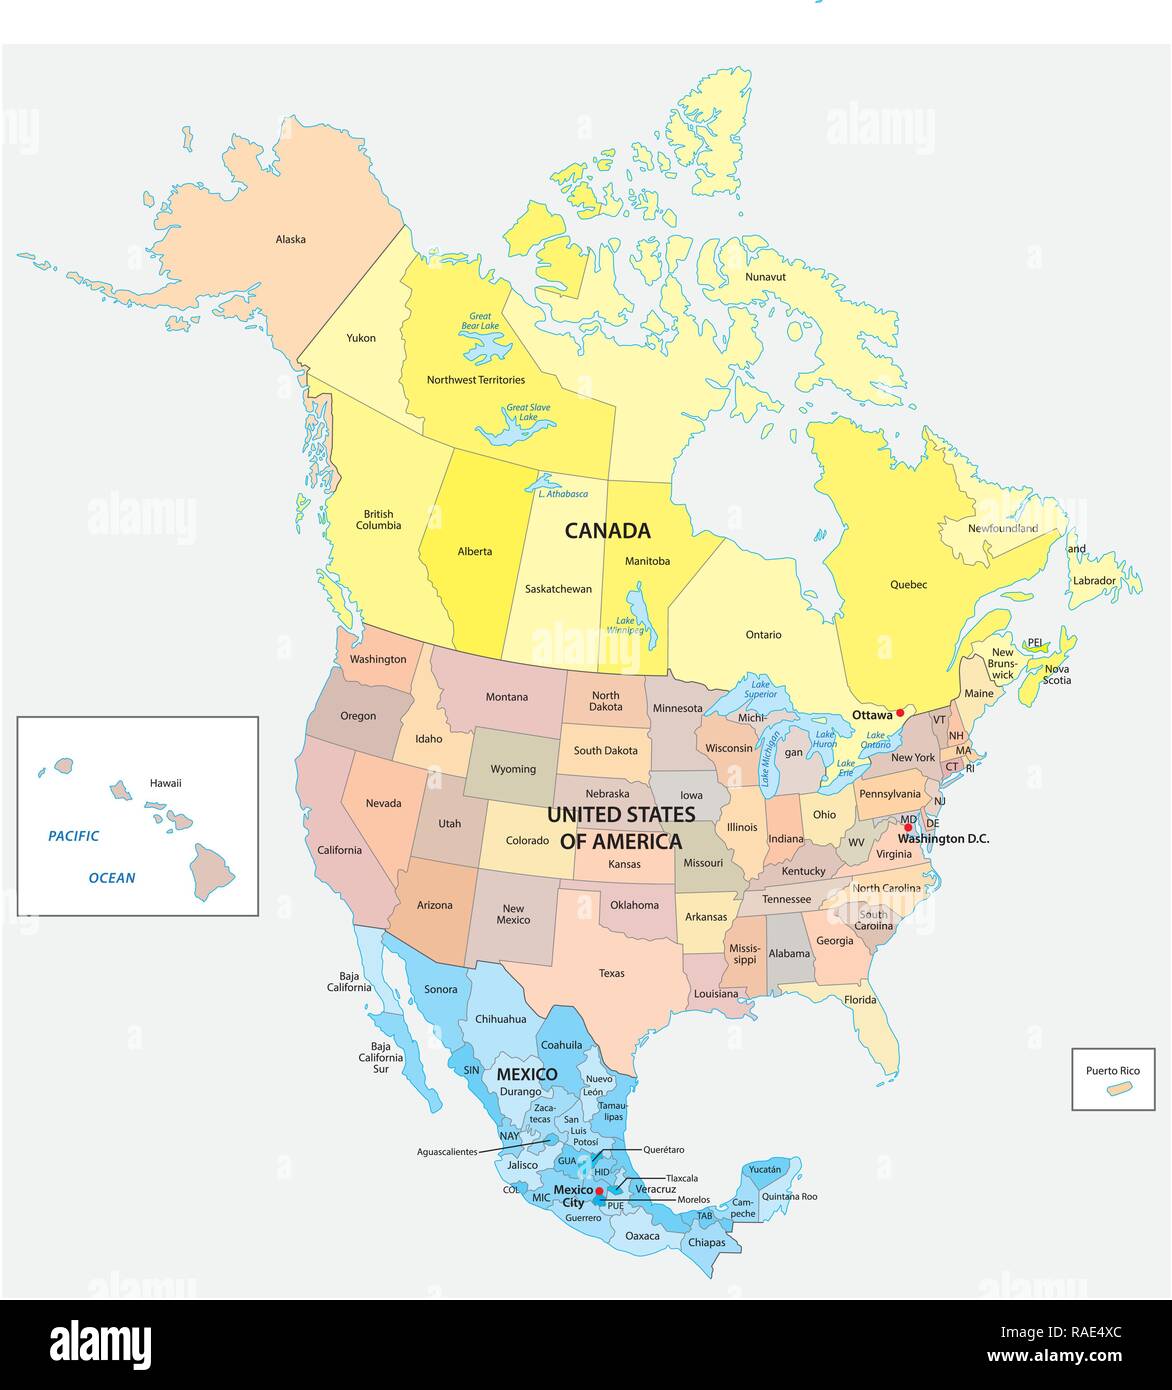 United States Of America And Canada Map High Resolution Stock